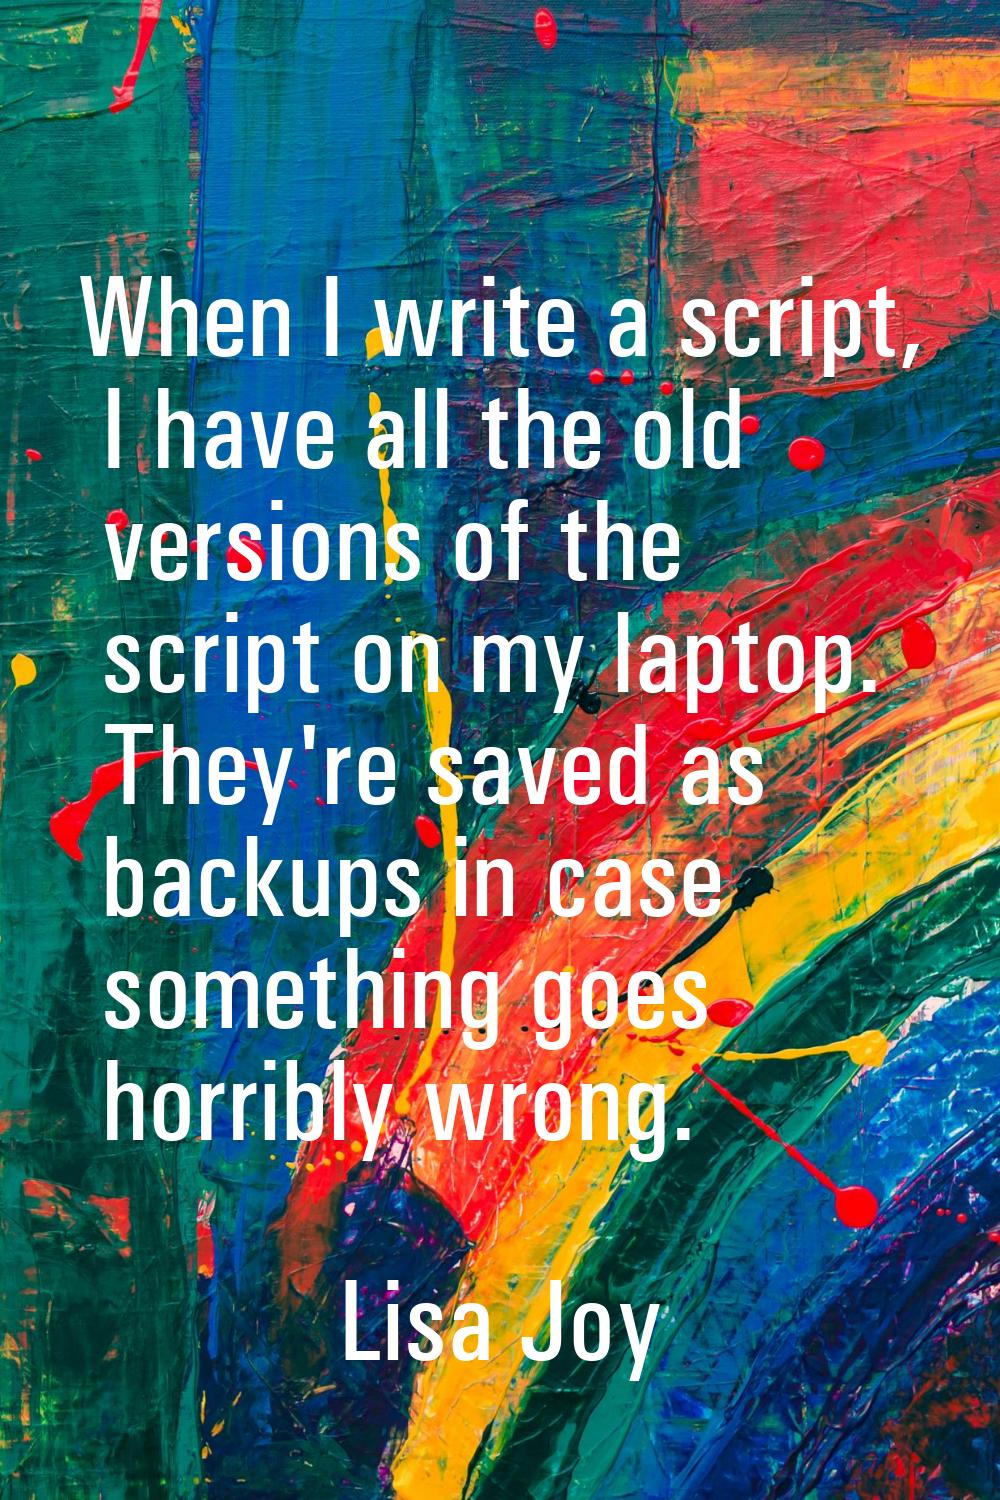 When I write a script, I have all the old versions of the script on my laptop. They're saved as bac